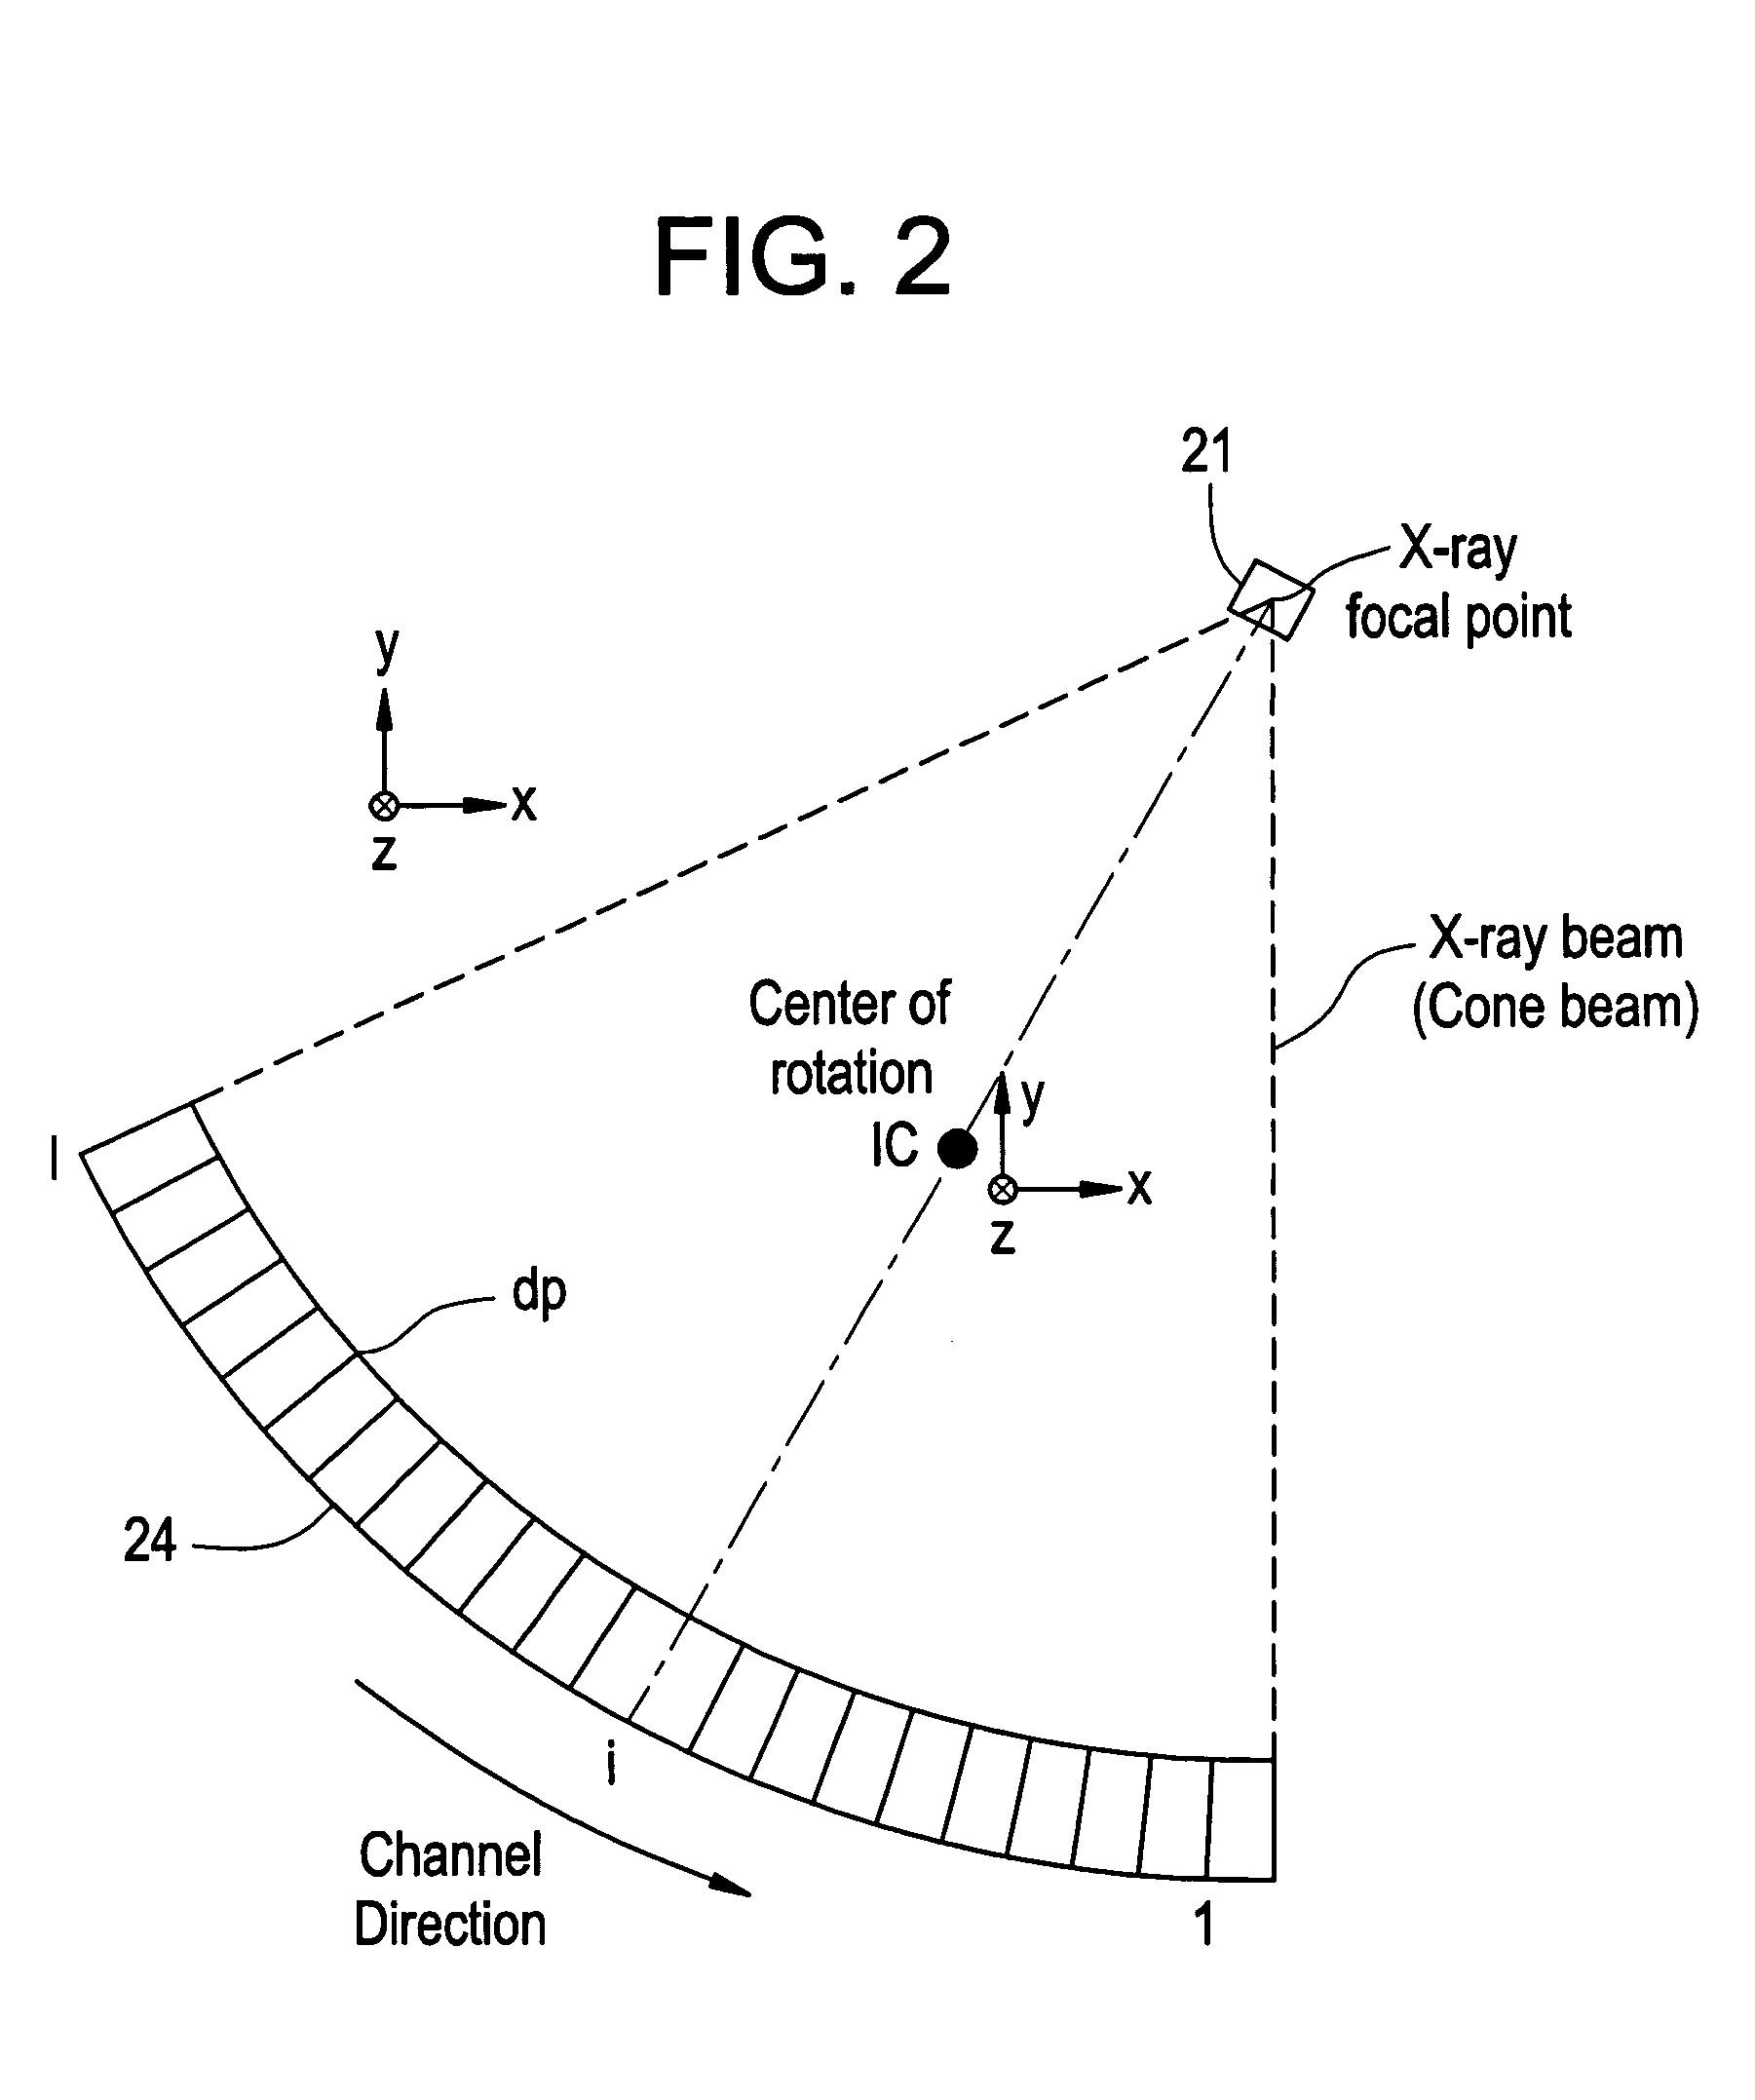 Collimator control method and X-ray CT apparatus